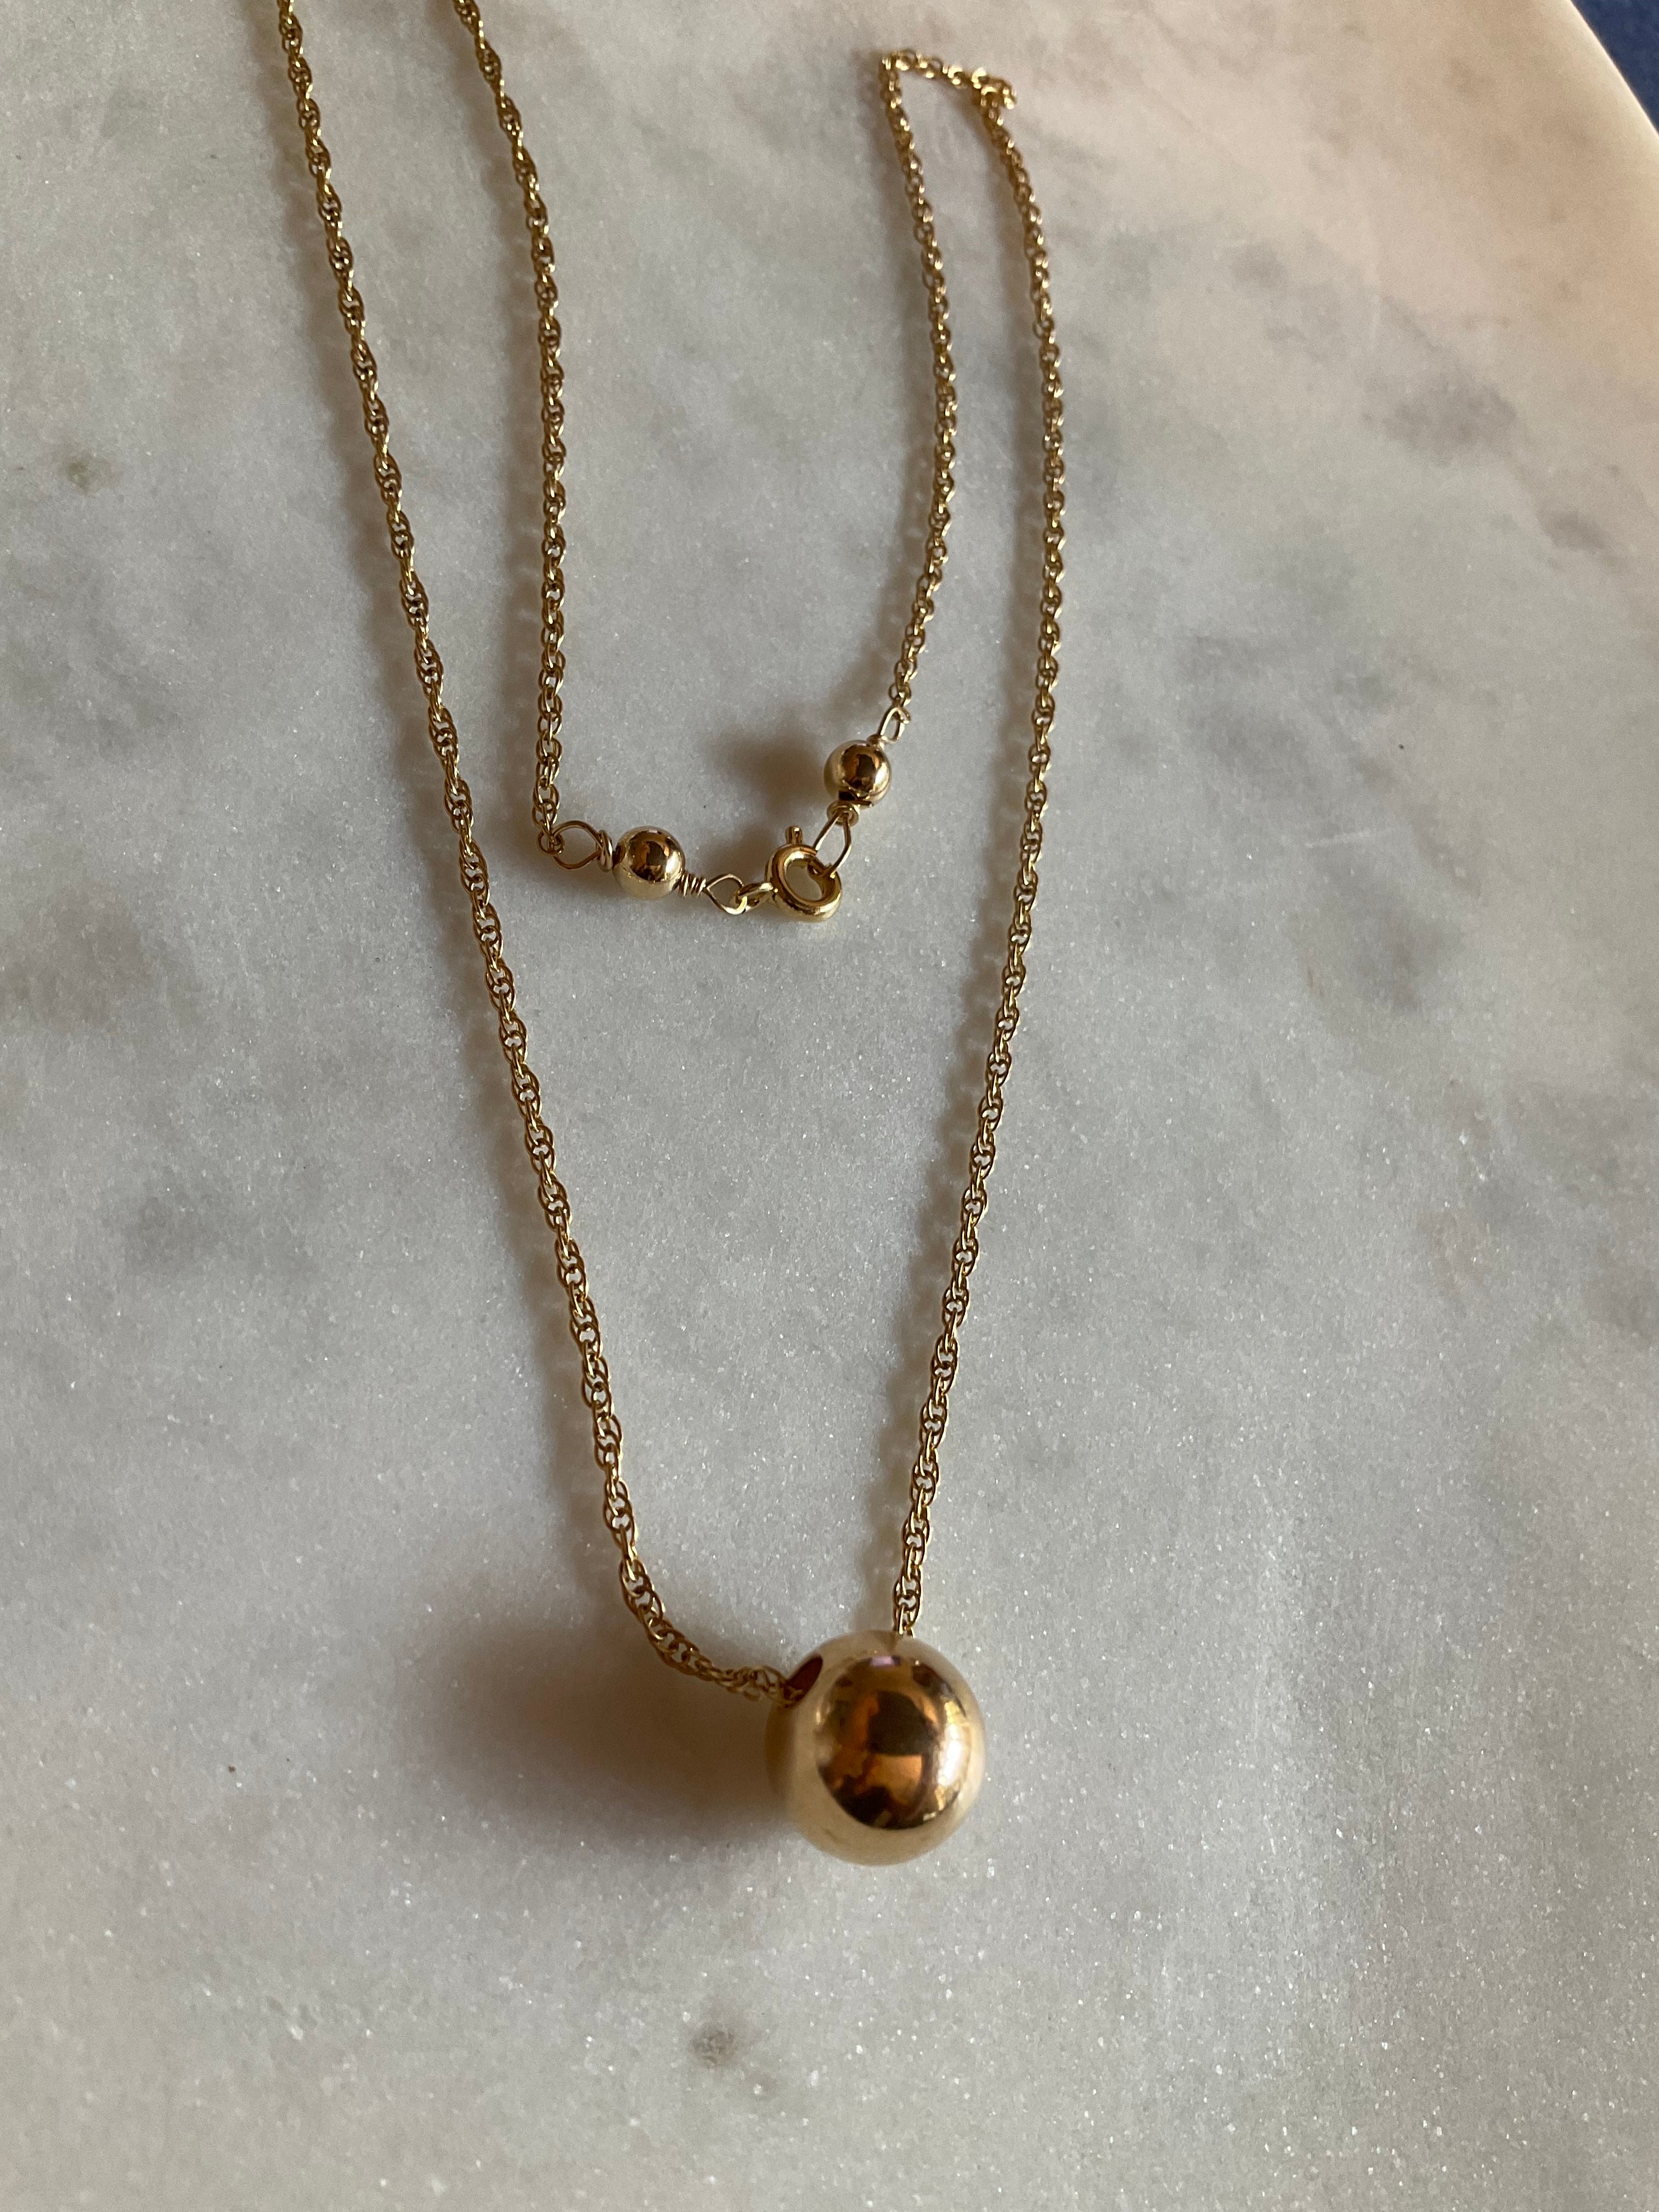 Manet Diamond and Brass Ball Pendant Necklace – Thea Grant